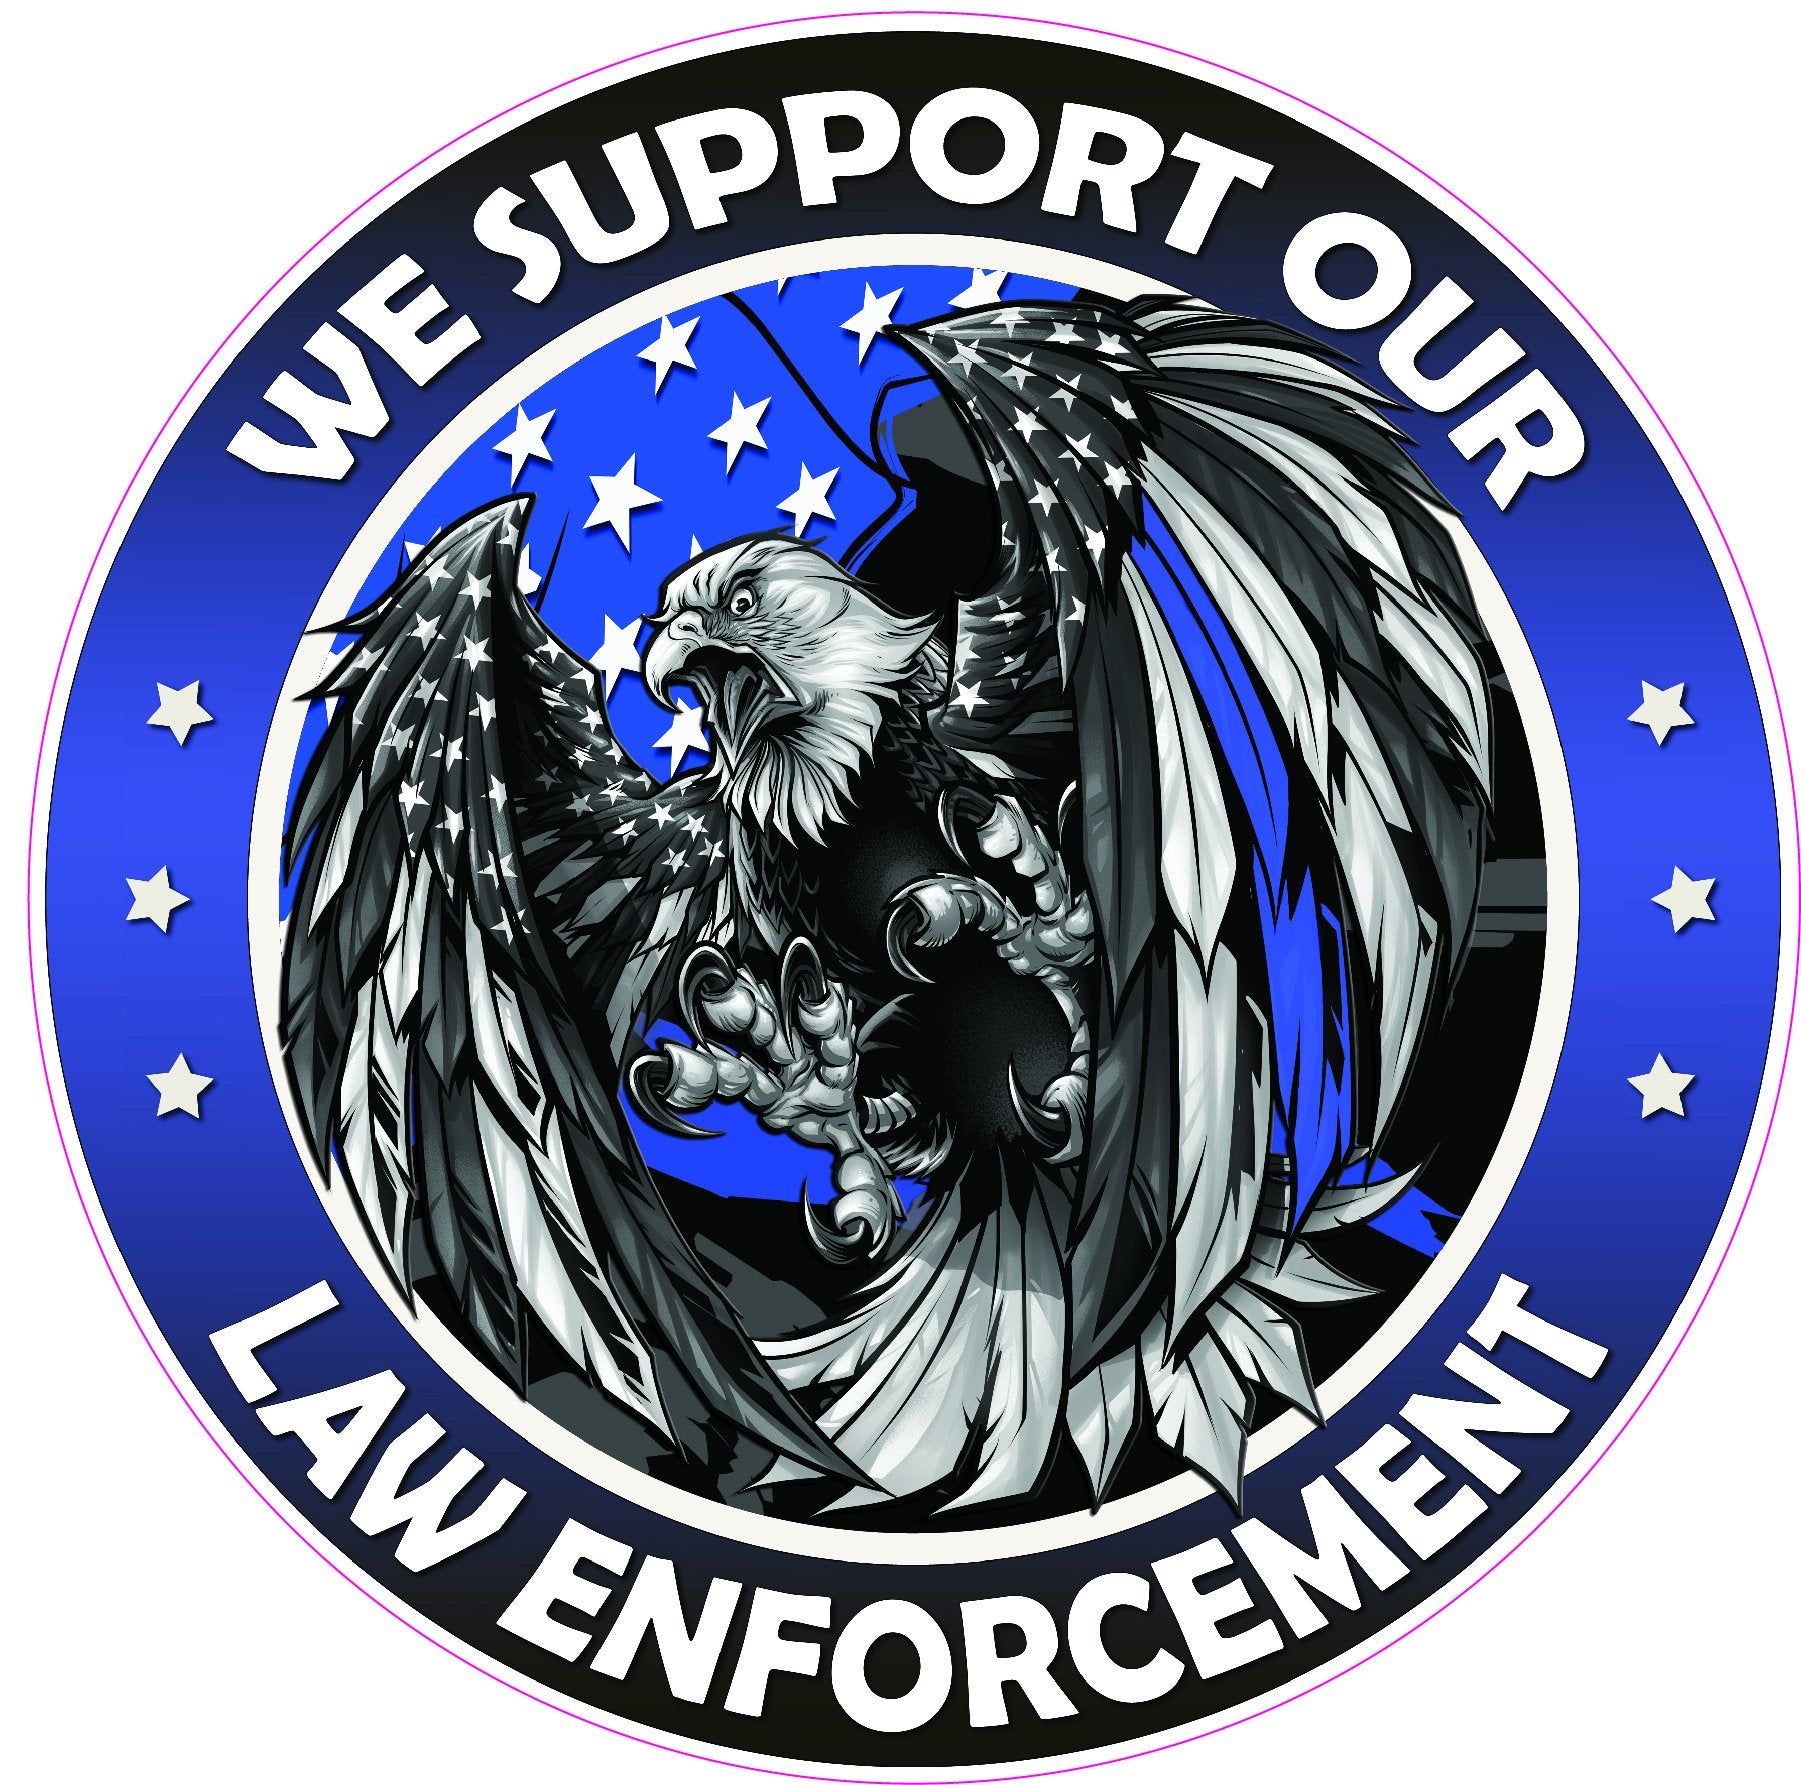 We Support our Thin Blue Line Law Enforcement American Flag Eagle Decal